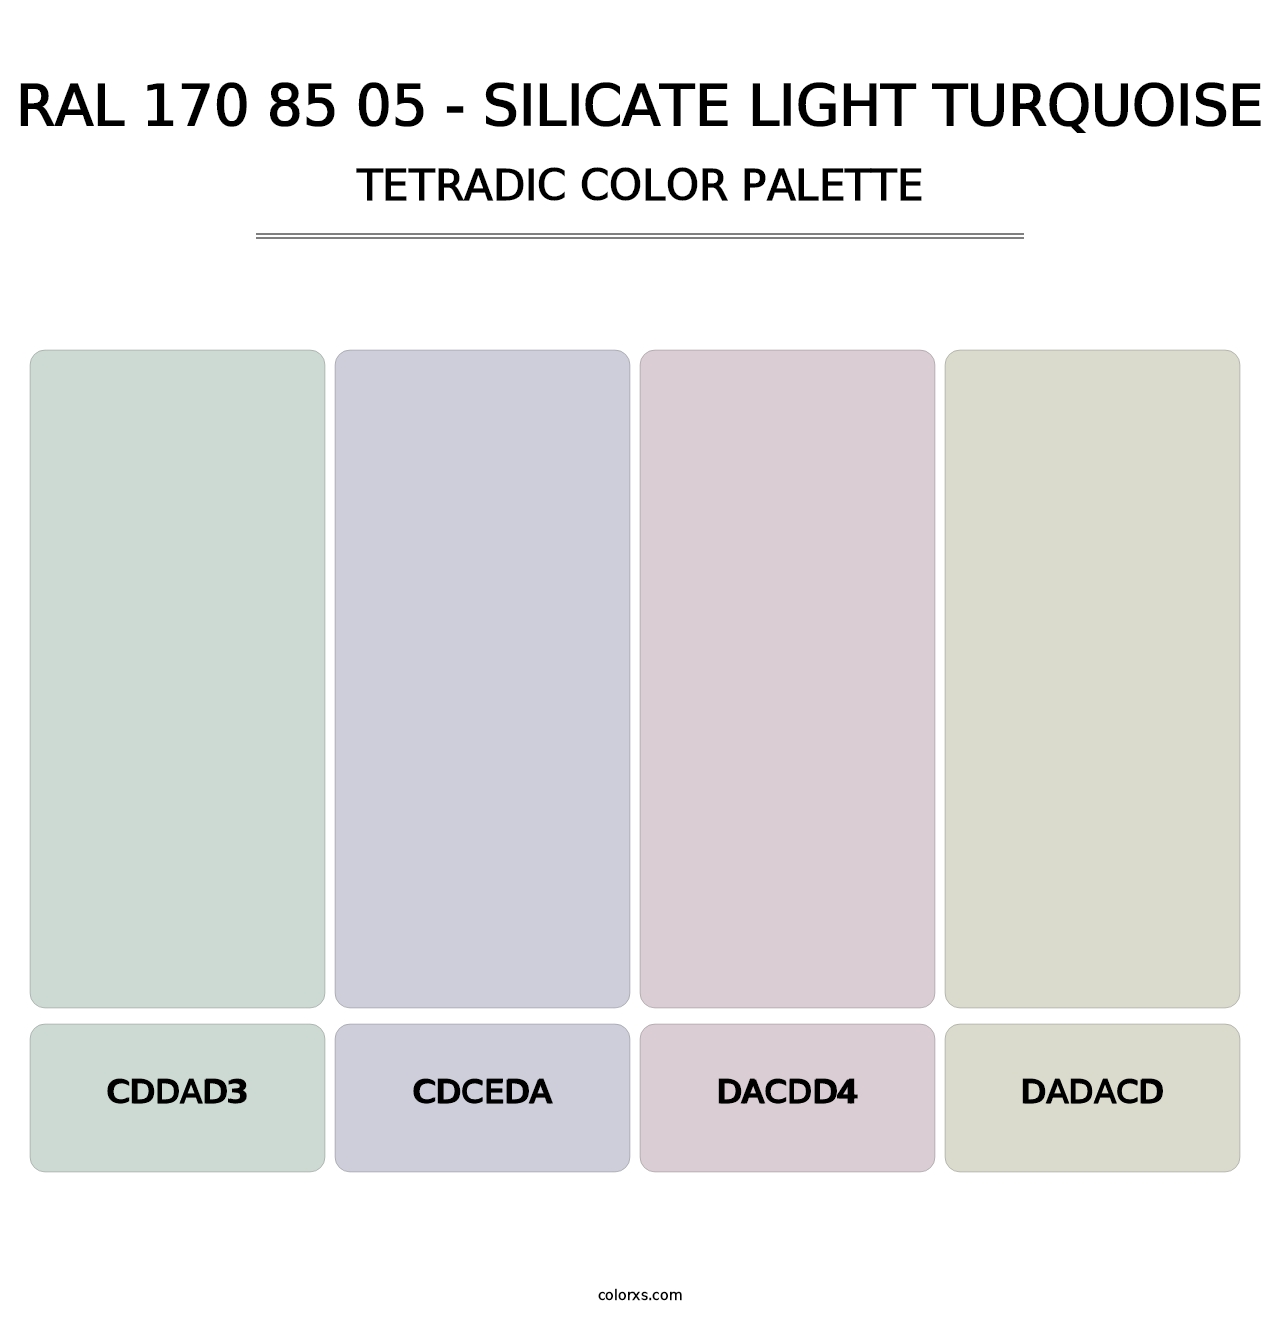 RAL 170 85 05 - Silicate Light Turquoise - Tetradic Color Palette